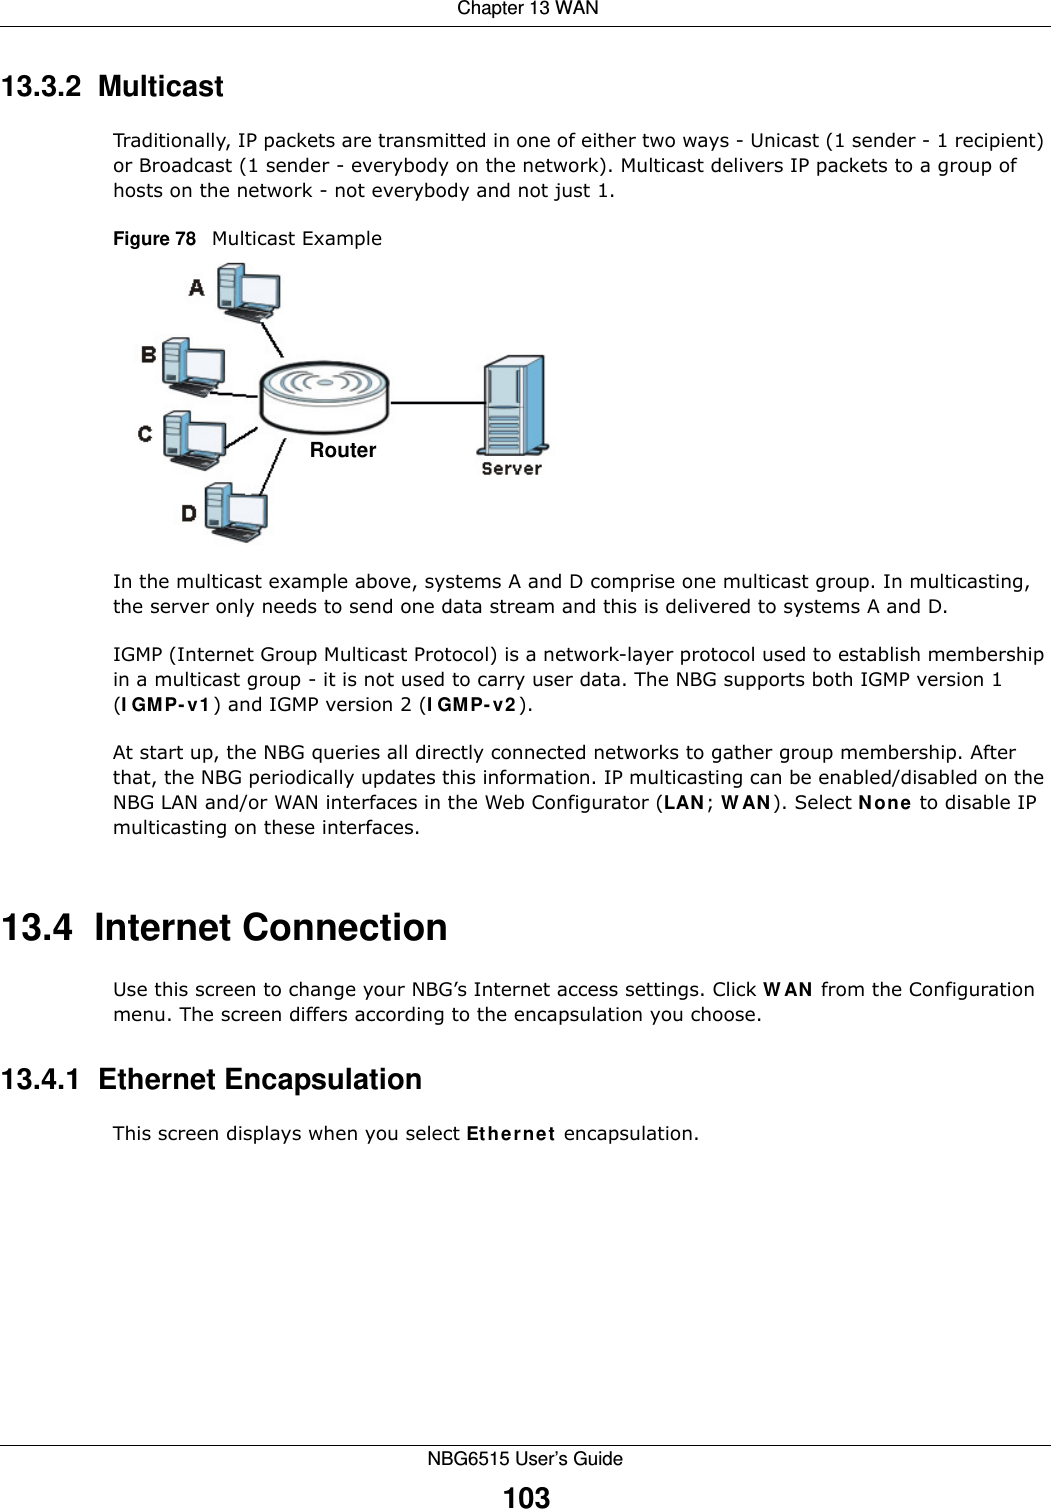  Chapter 13 WANNBG6515 User’s Guide10313.3.2  MulticastTraditionally, IP packets are transmitted in one of either two ways - Unicast (1 sender - 1 recipient) or Broadcast (1 sender - everybody on the network). Multicast delivers IP packets to a group of hosts on the network - not everybody and not just 1. Figure 78   Multicast ExampleIn the multicast example above, systems A and D comprise one multicast group. In multicasting, the server only needs to send one data stream and this is delivered to systems A and D. IGMP (Internet Group Multicast Protocol) is a network-layer protocol used to establish membership in a multicast group - it is not used to carry user data. The NBG supports both IGMP version 1 (IGMP-v1) and IGMP version 2 (IGMP-v2). At start up, the NBG queries all directly connected networks to gather group membership. After that, the NBG periodically updates this information. IP multicasting can be enabled/disabled on the NBG LAN and/or WAN interfaces in the Web Configurator (LAN; WAN). Select None to disable IP multicasting on these interfaces.13.4  Internet ConnectionUse this screen to change your NBG’s Internet access settings. Click WAN from the Configuration menu. The screen differs according to the encapsulation you choose.13.4.1  Ethernet EncapsulationThis screen displays when you select Ethernet encapsulation.Router